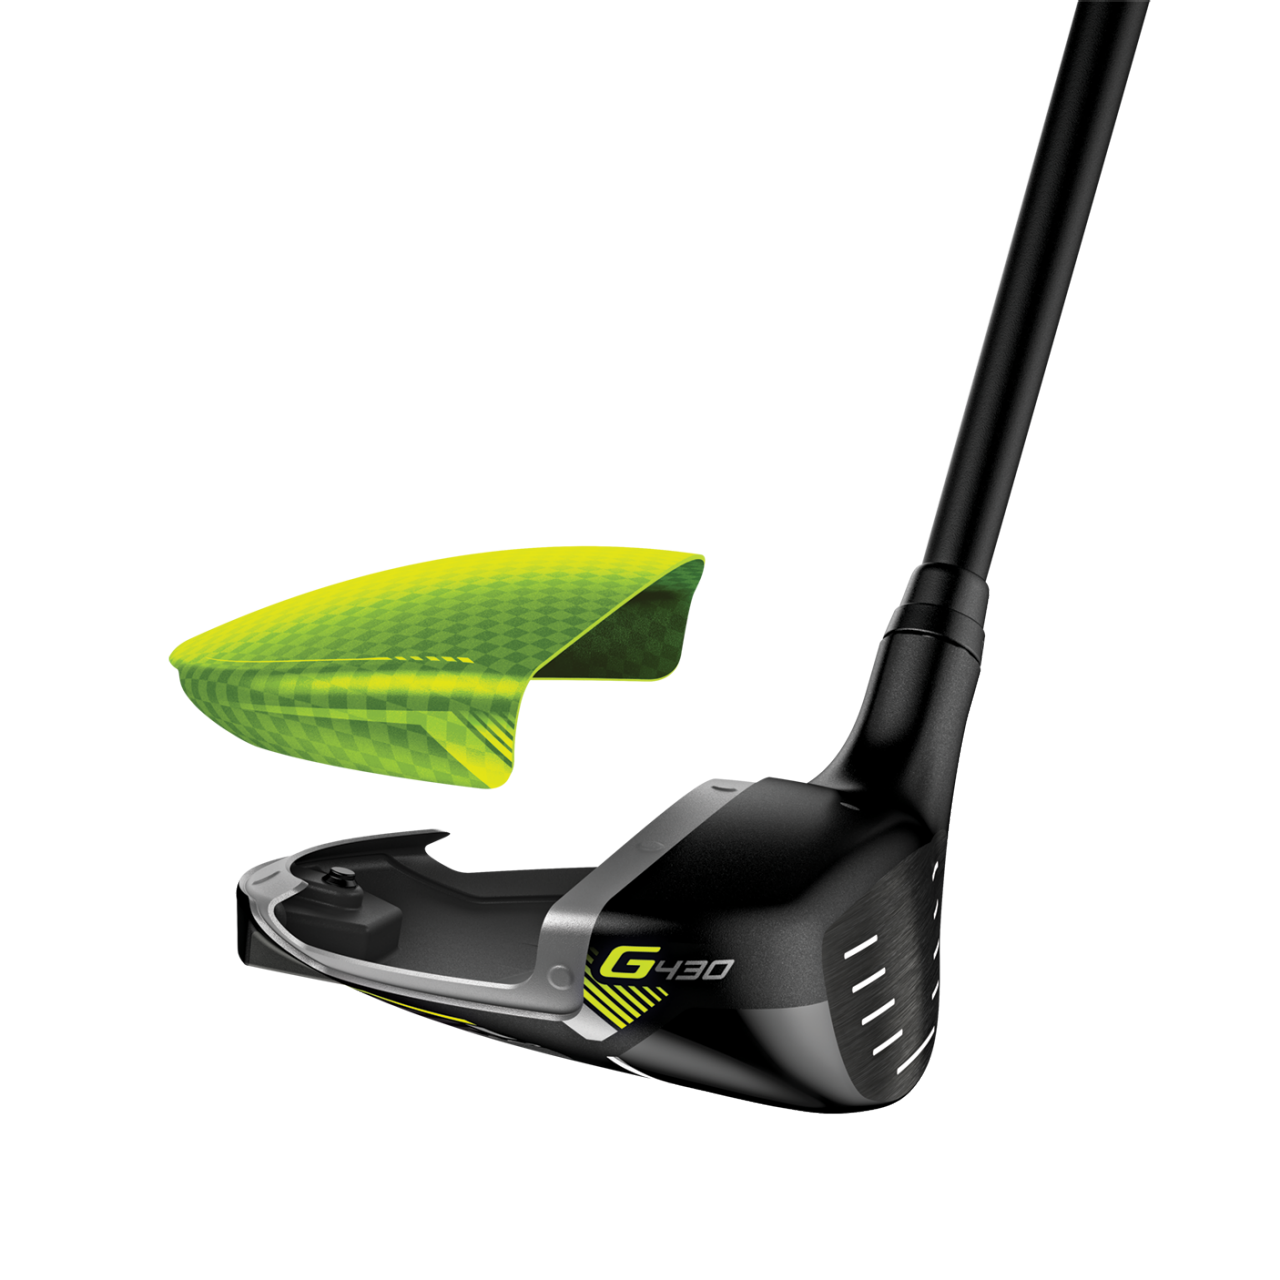 Ping G430 fairway woods, hybrids: What you need to know | Golf Equipment:  Clubs, Balls, Bags | GolfDigest.com